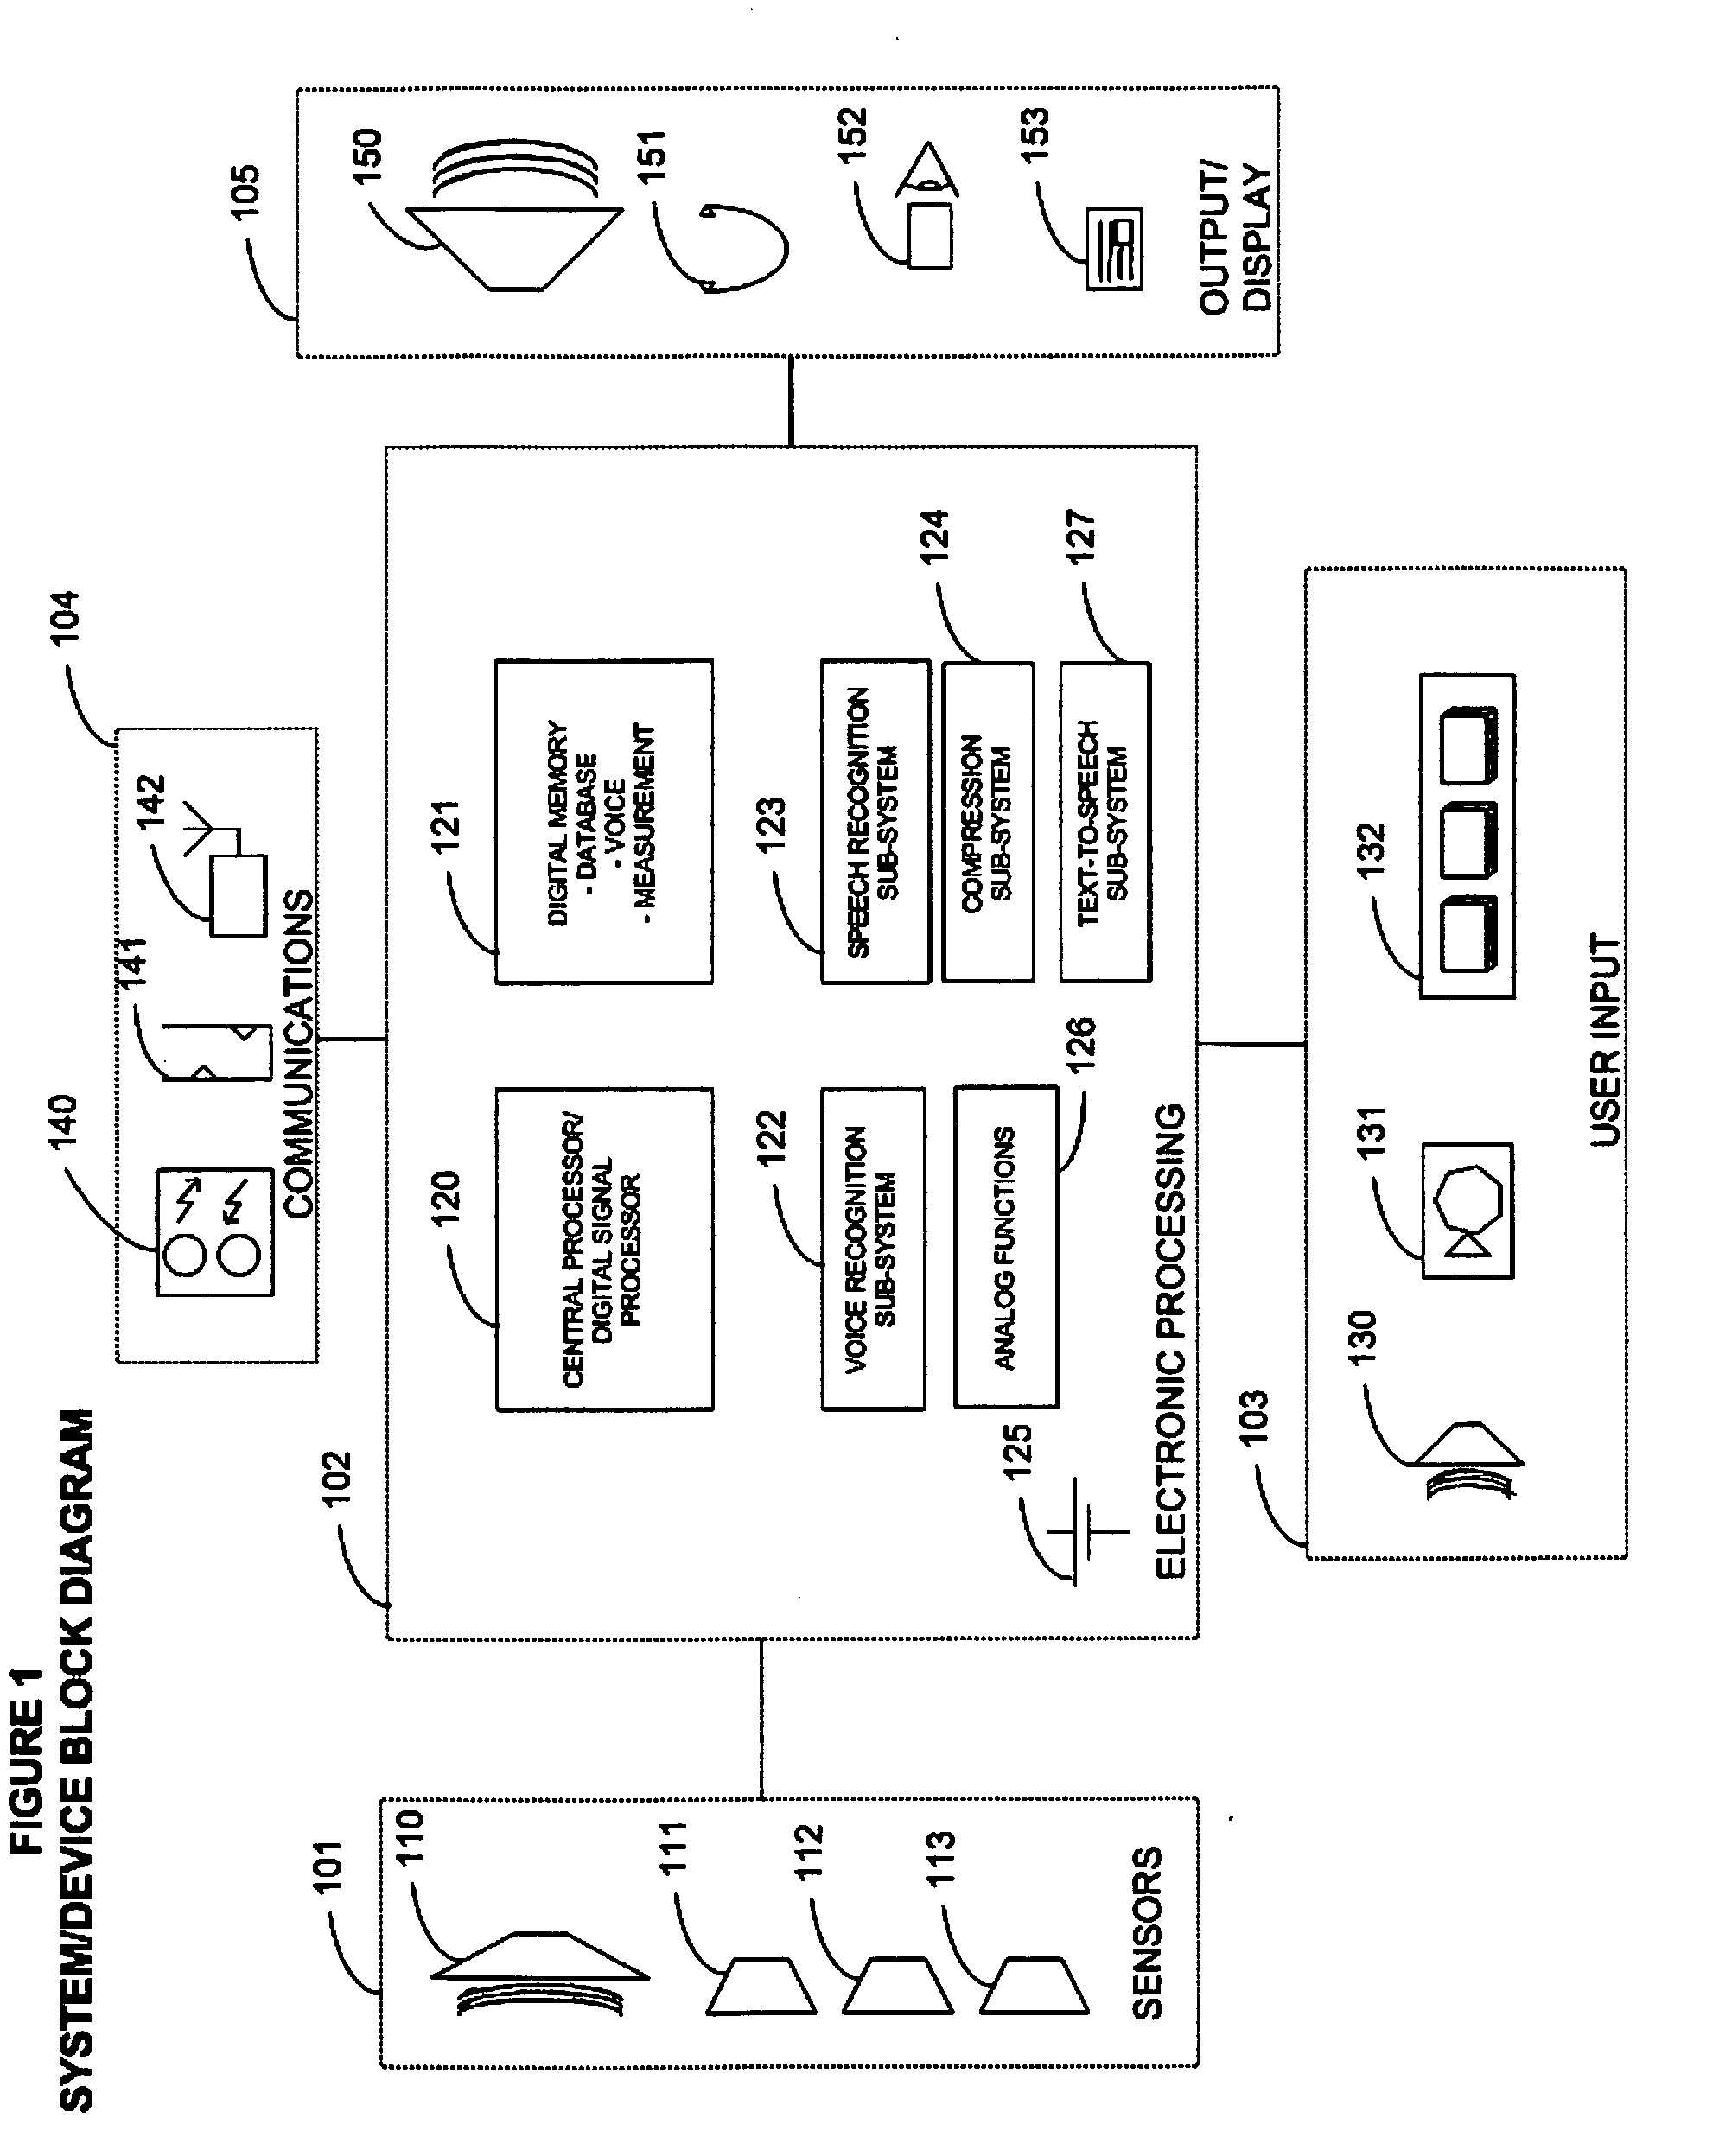 Medical device with communication, measurement and data functions